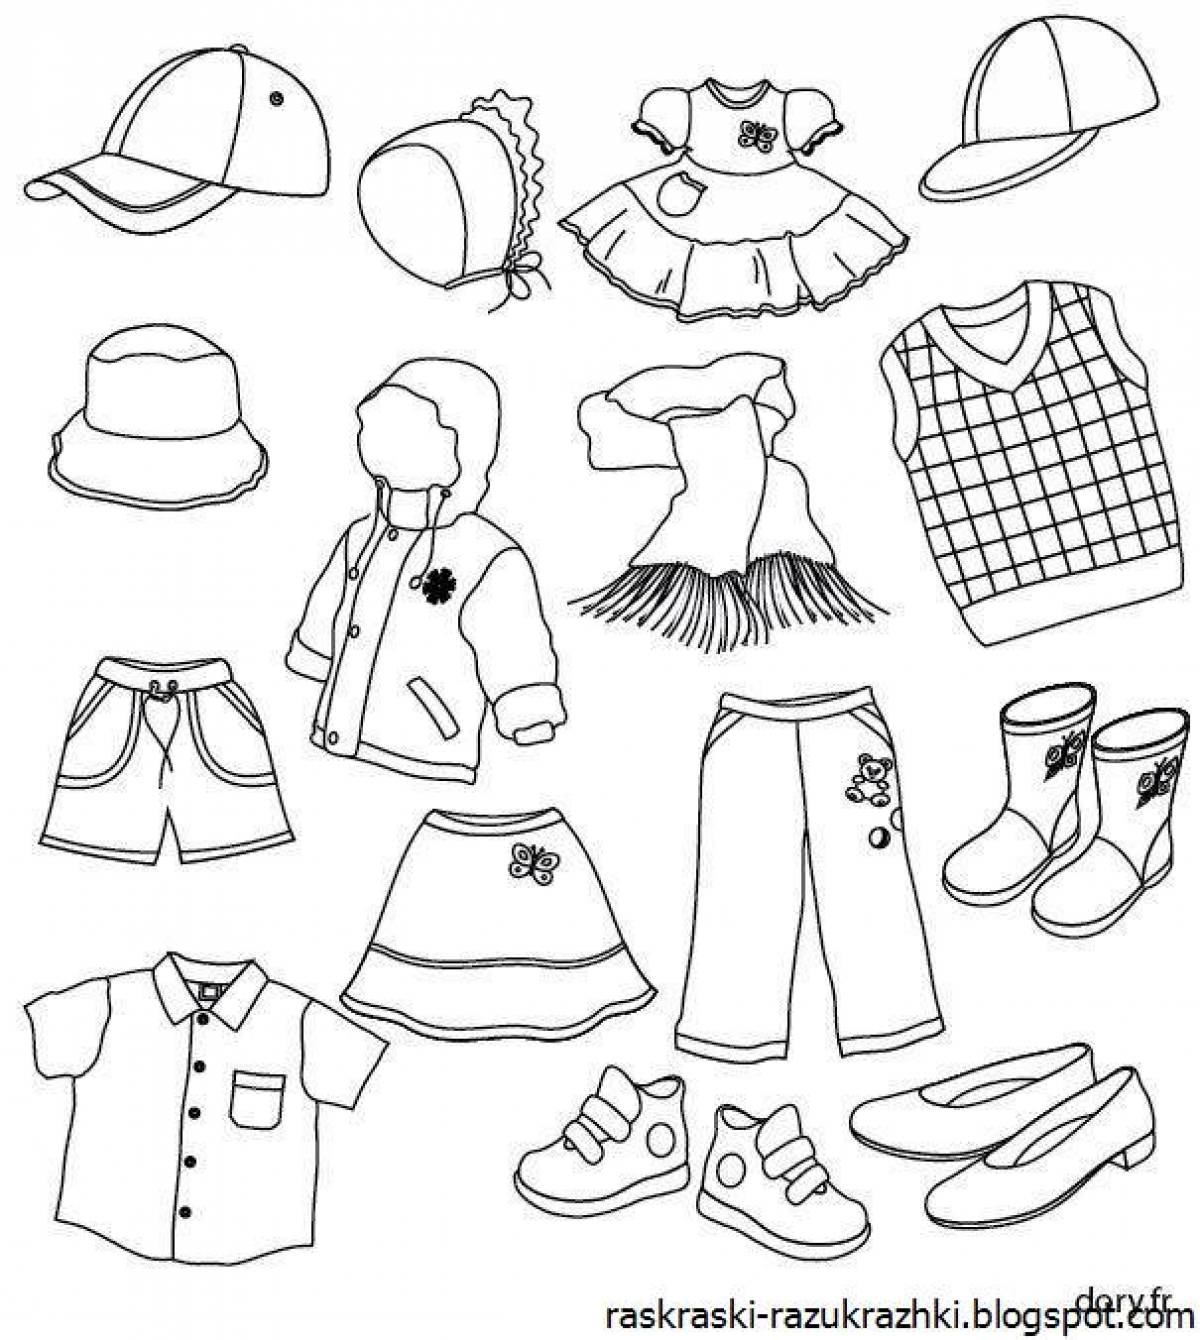 Colorful clothing coloring page for 5-6 year olds